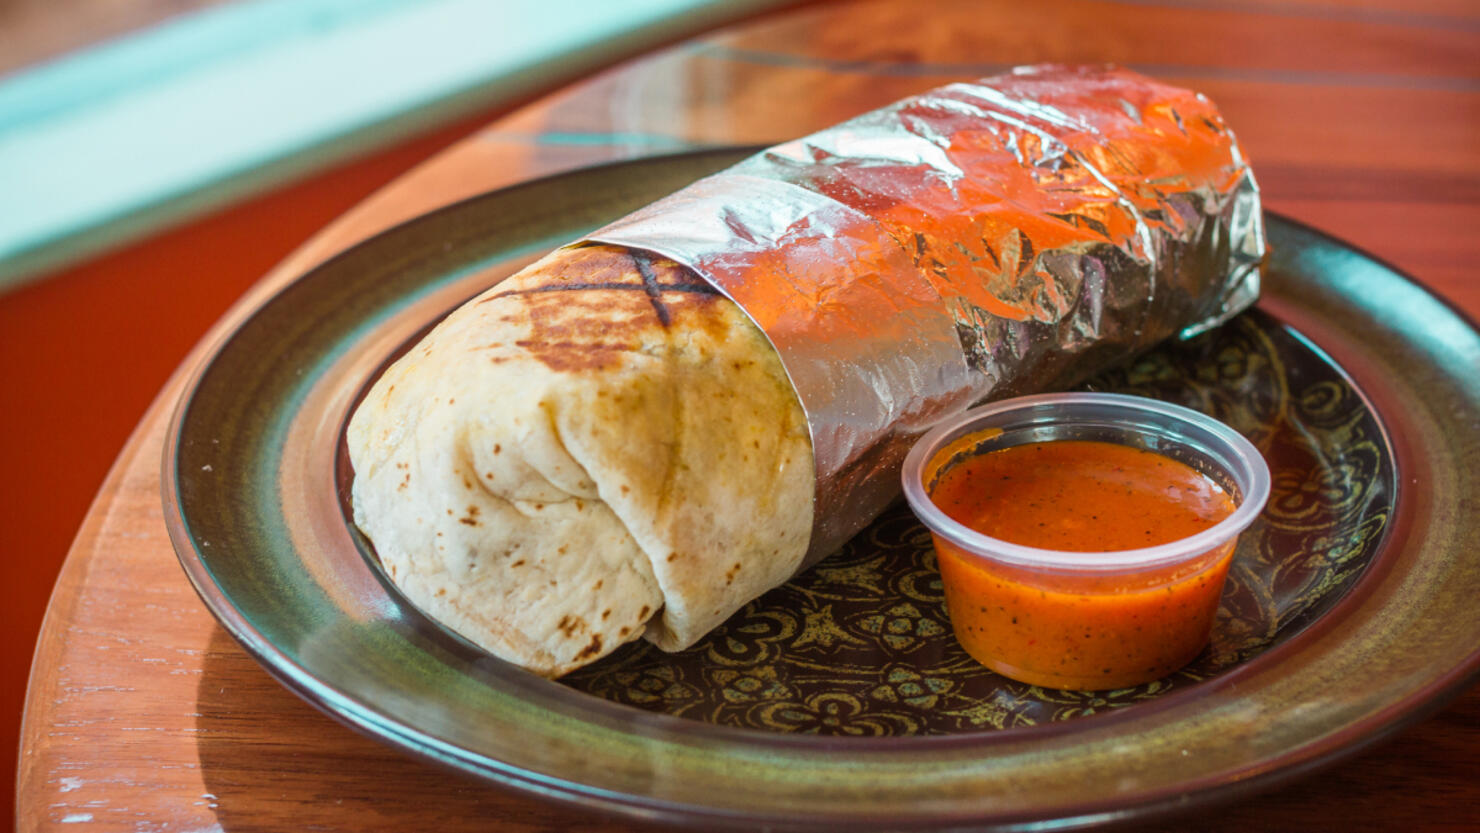 This North Carolina Restaurant Has The Best Cheap Burrito In The State